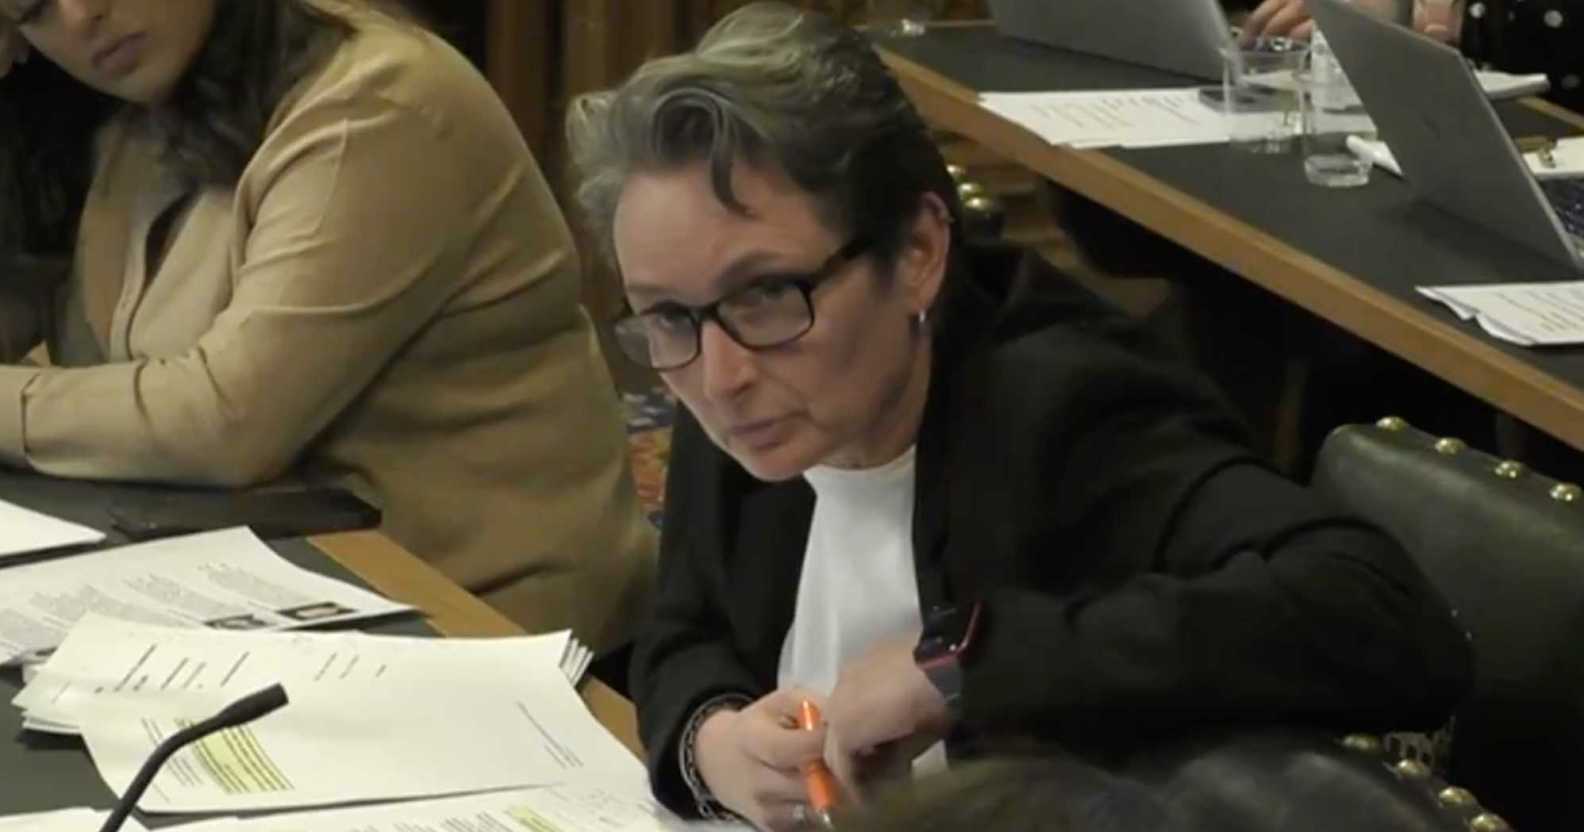 A screenshot of Labour MP Kate Osbourne wearing a white shirt and black suit jacket as she sits at a desk with papers in front of her during a women and equalities committee meeting